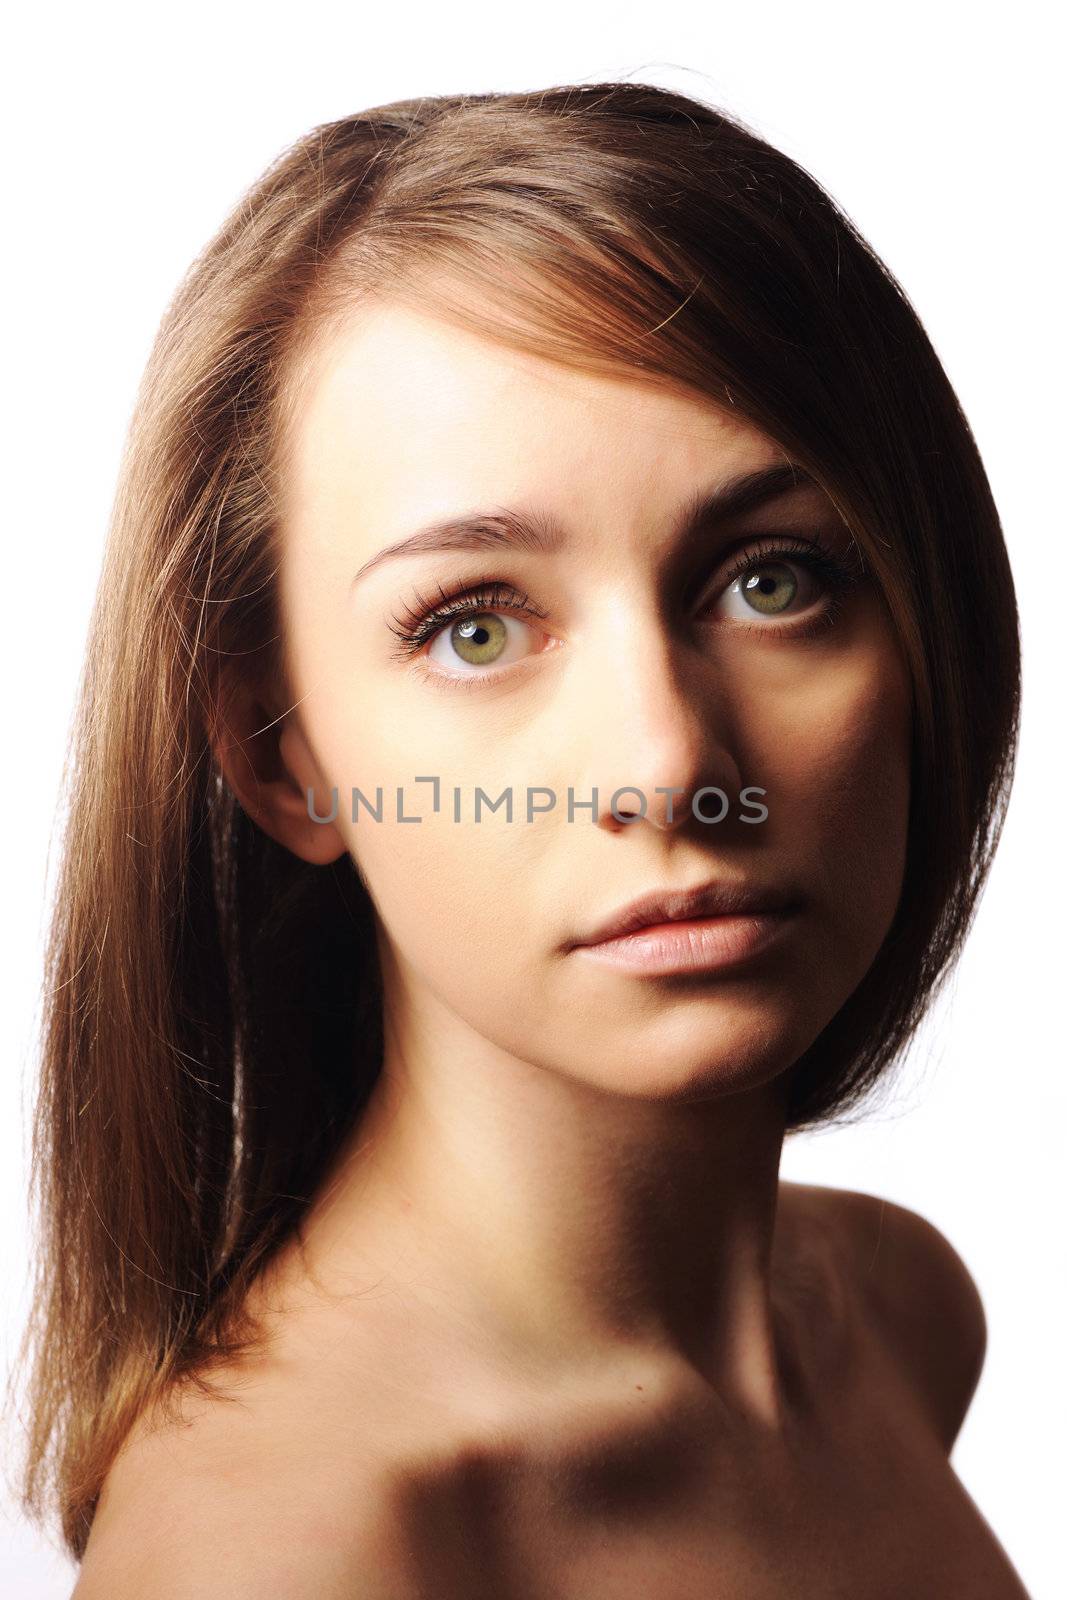 Beautiful young woman over white background